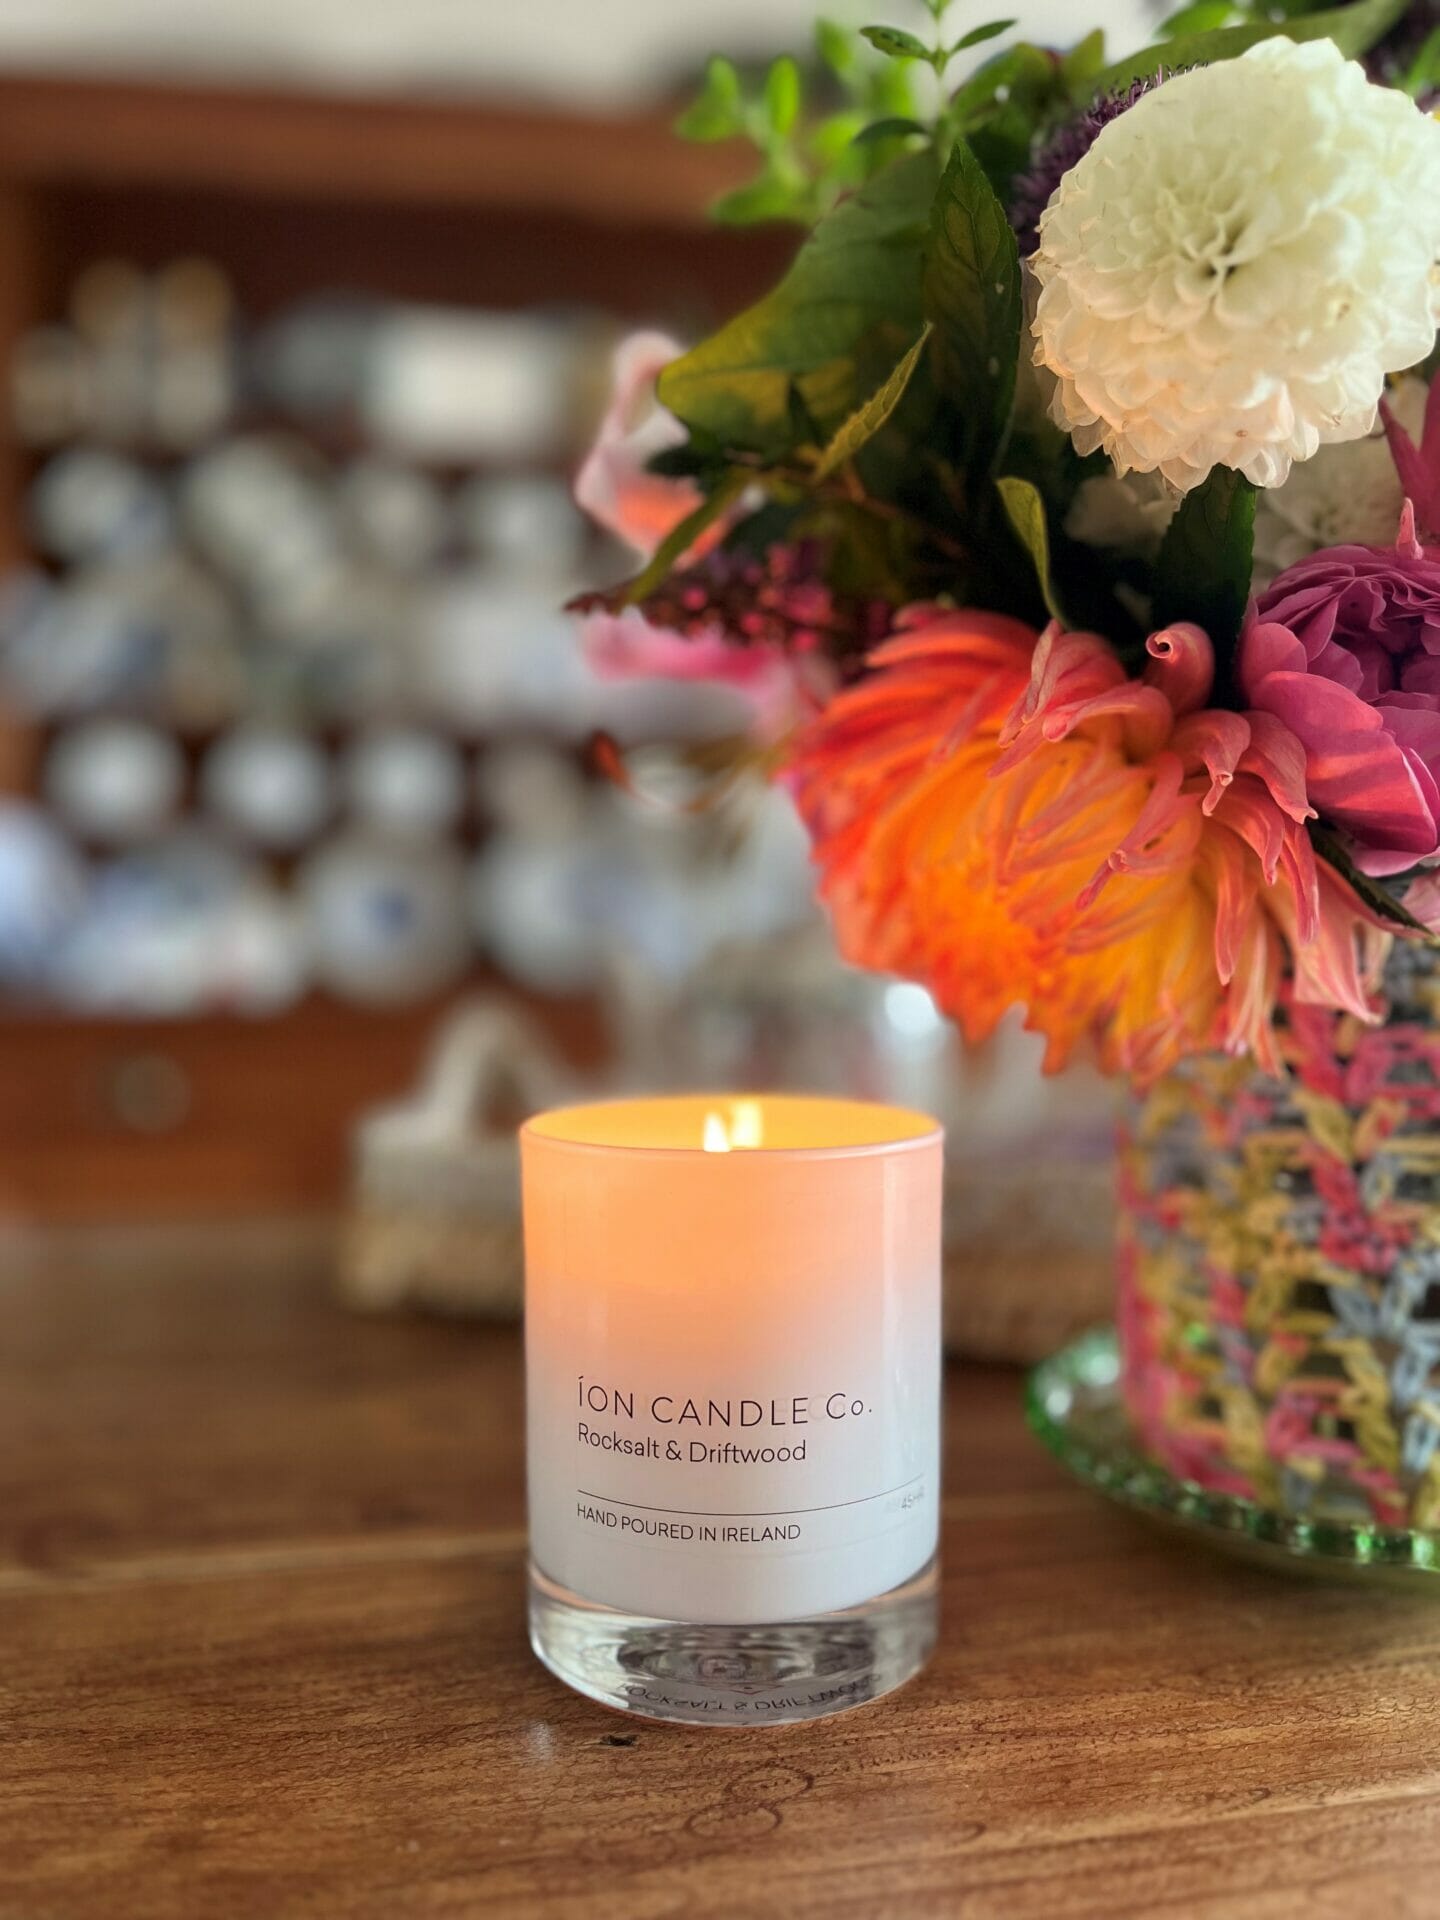 Scented candle, Ion, in white glass, sitting on table beside flowers